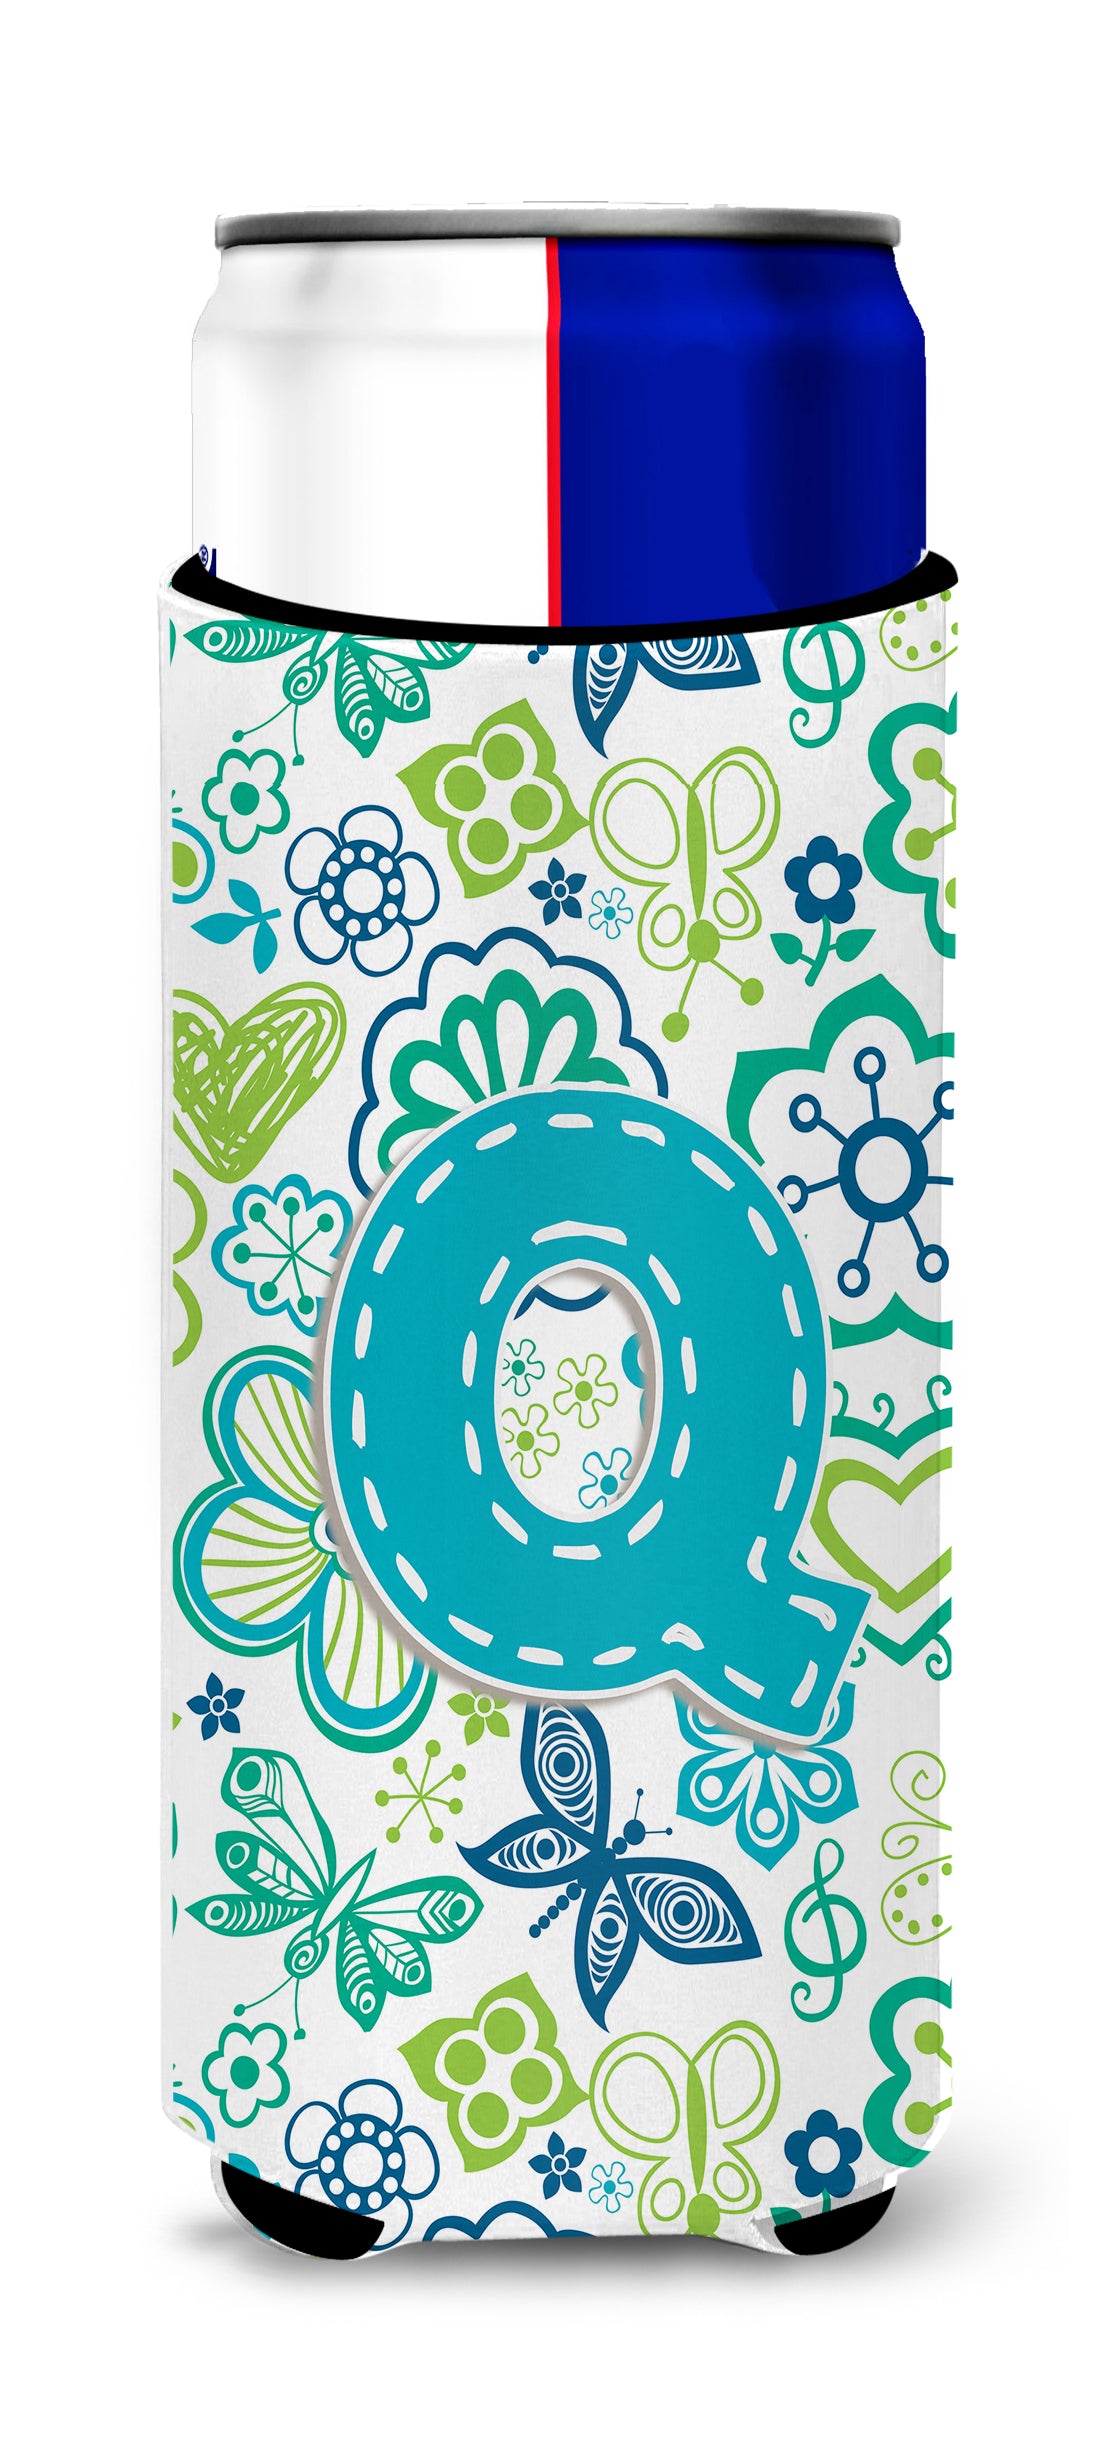 Letter Q Flowers and Butterflies Teal Blue Ultra Beverage Insulators for slim cans CJ2006-QMUK.